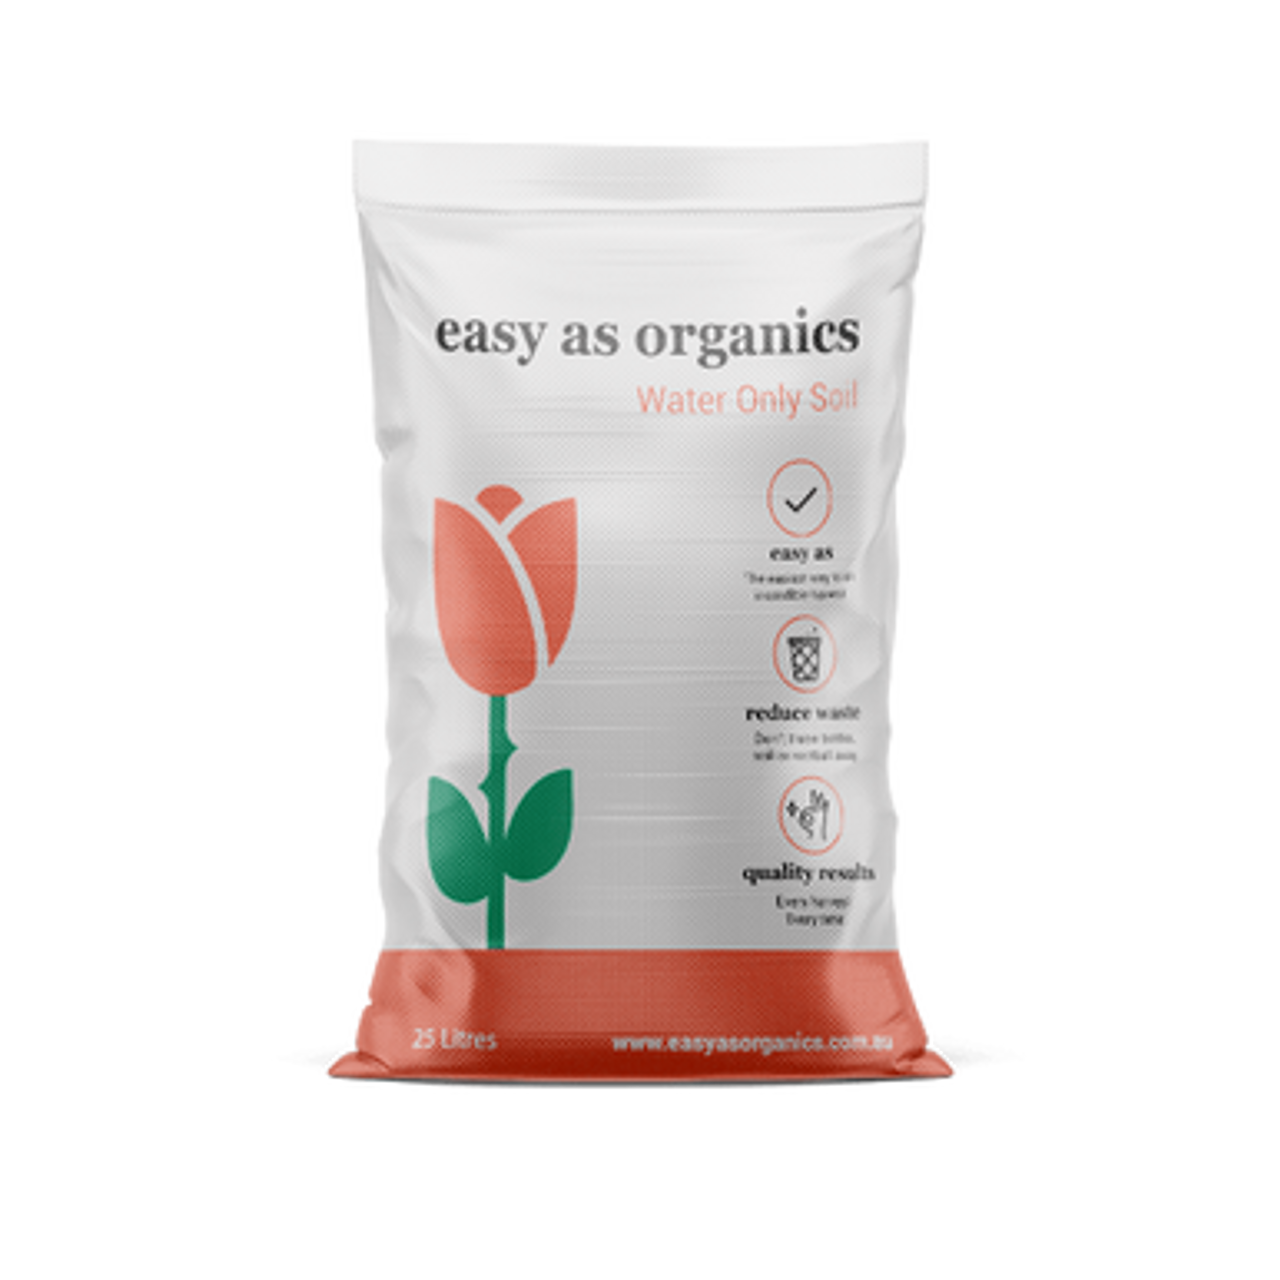 EASY AS ORGANICS WATER ONLY SOIL 25 LITRE